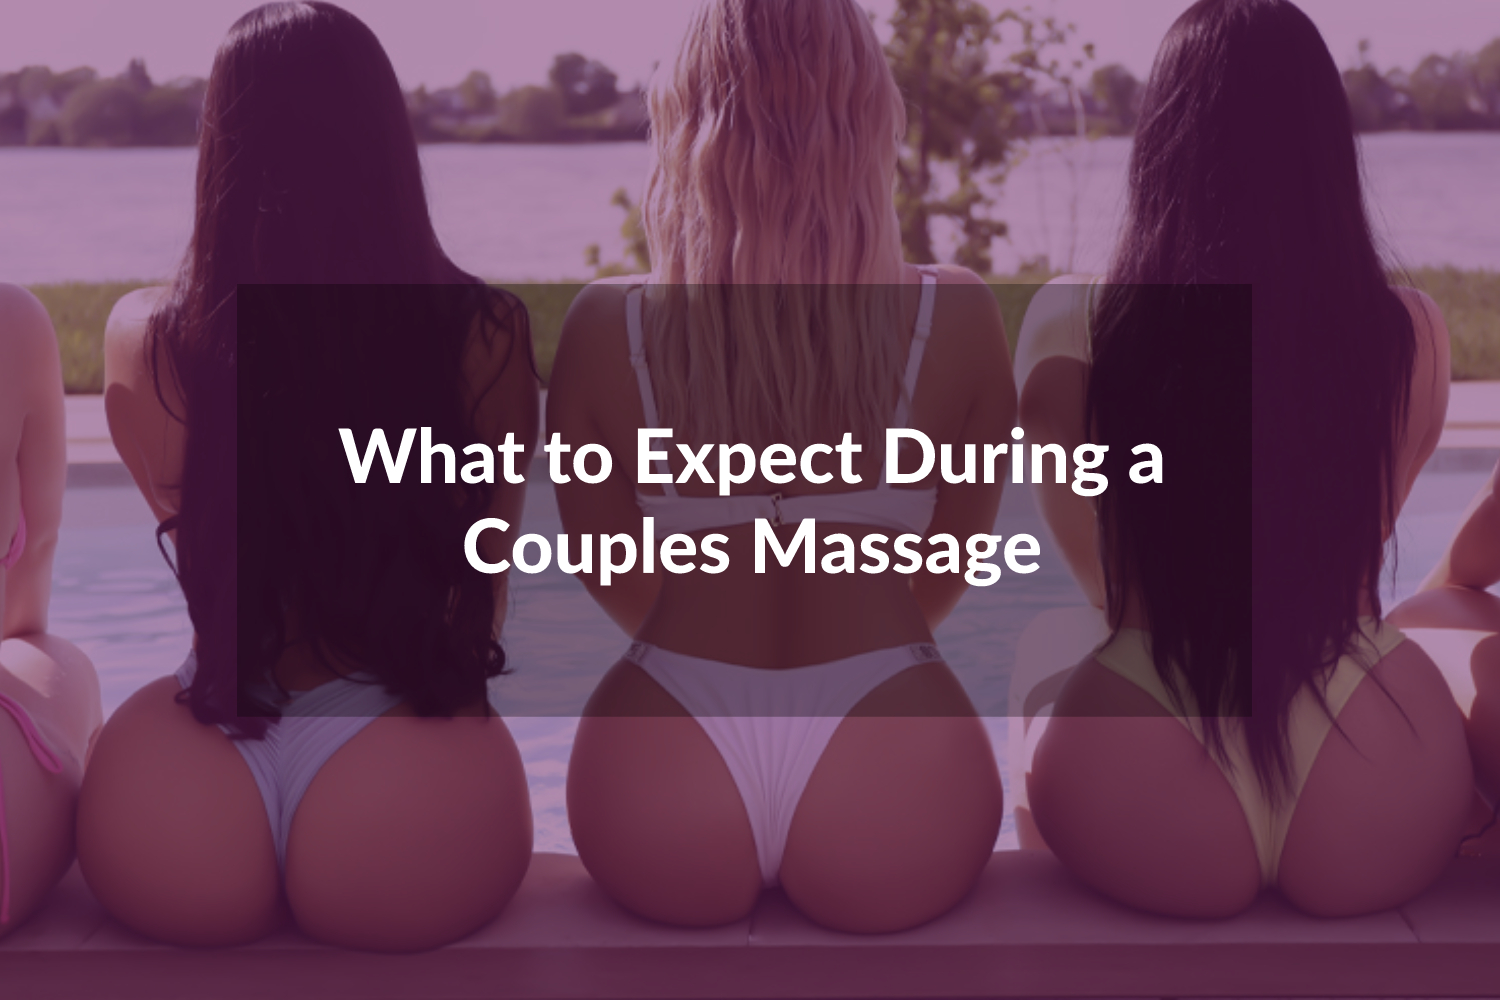 Couples Massage at an Erotic Massage Parlor